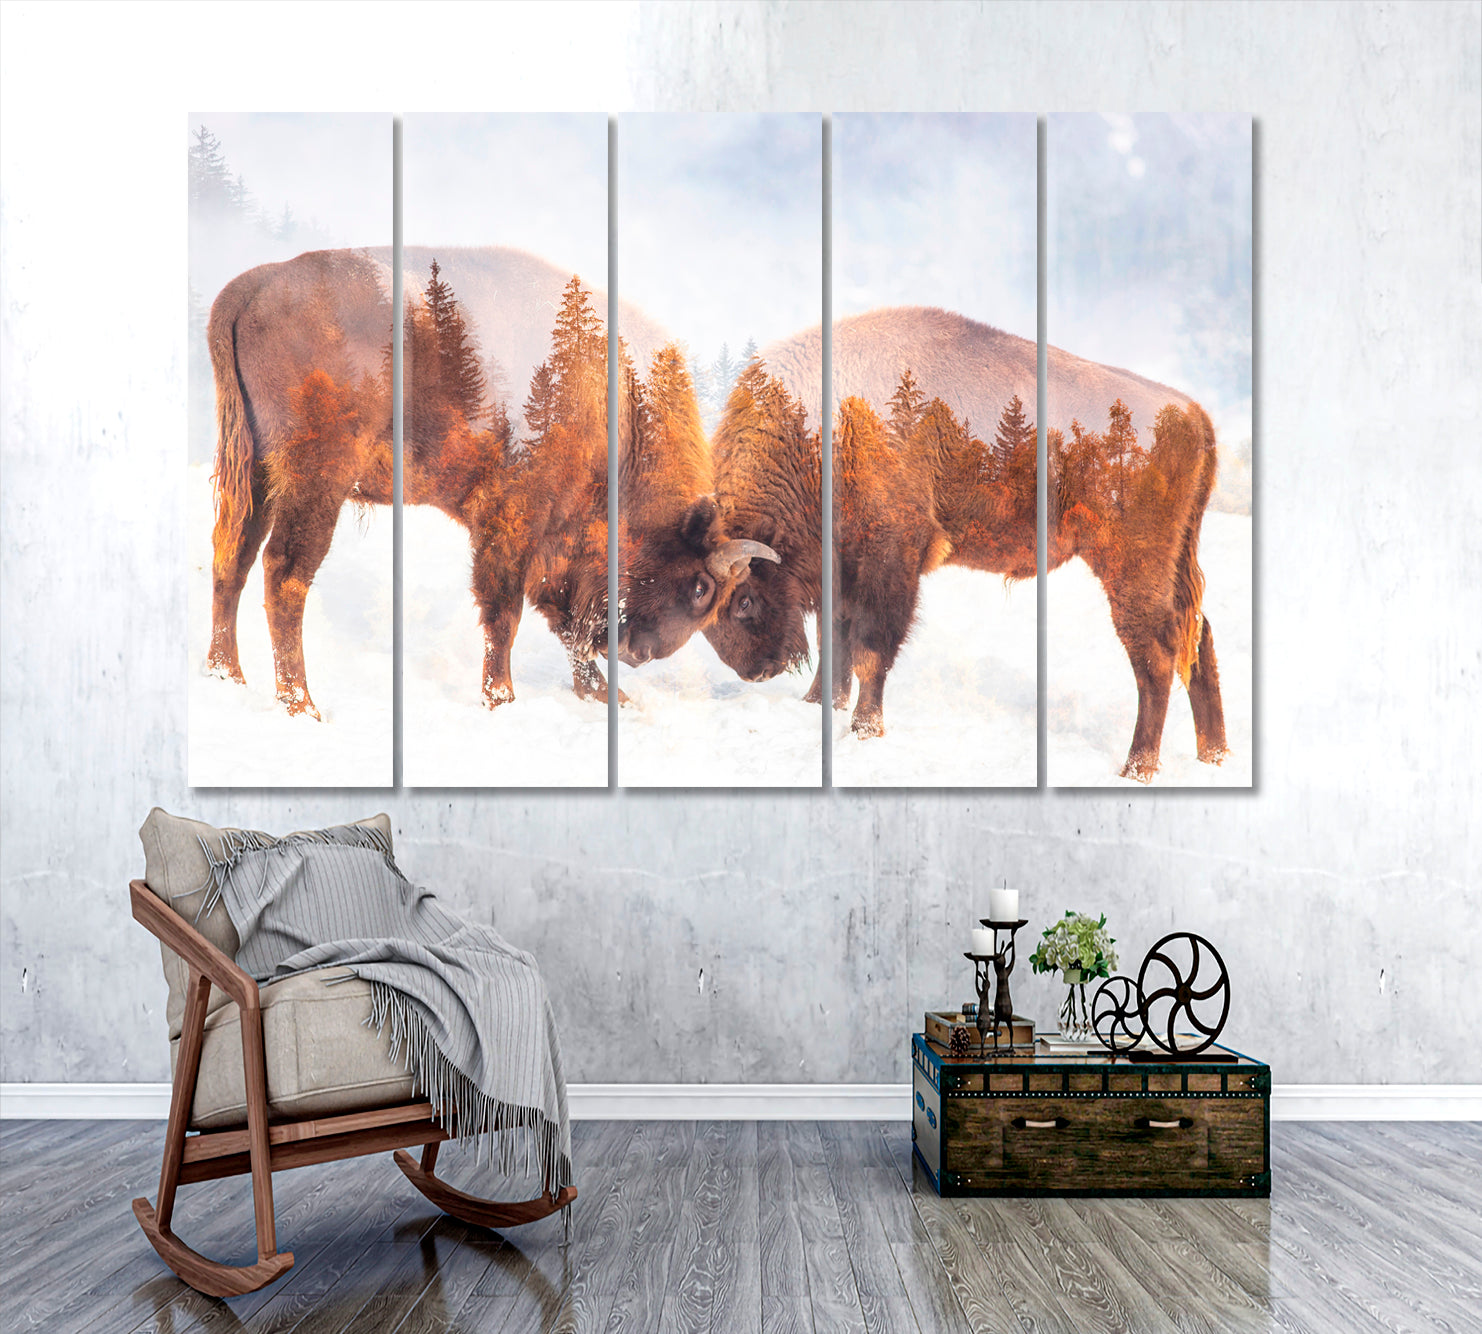 Double Exposure Two Wild Bison Fighting And Pine Trees Wild Life Framed Art Artesty 5 panels 36" x 24" 